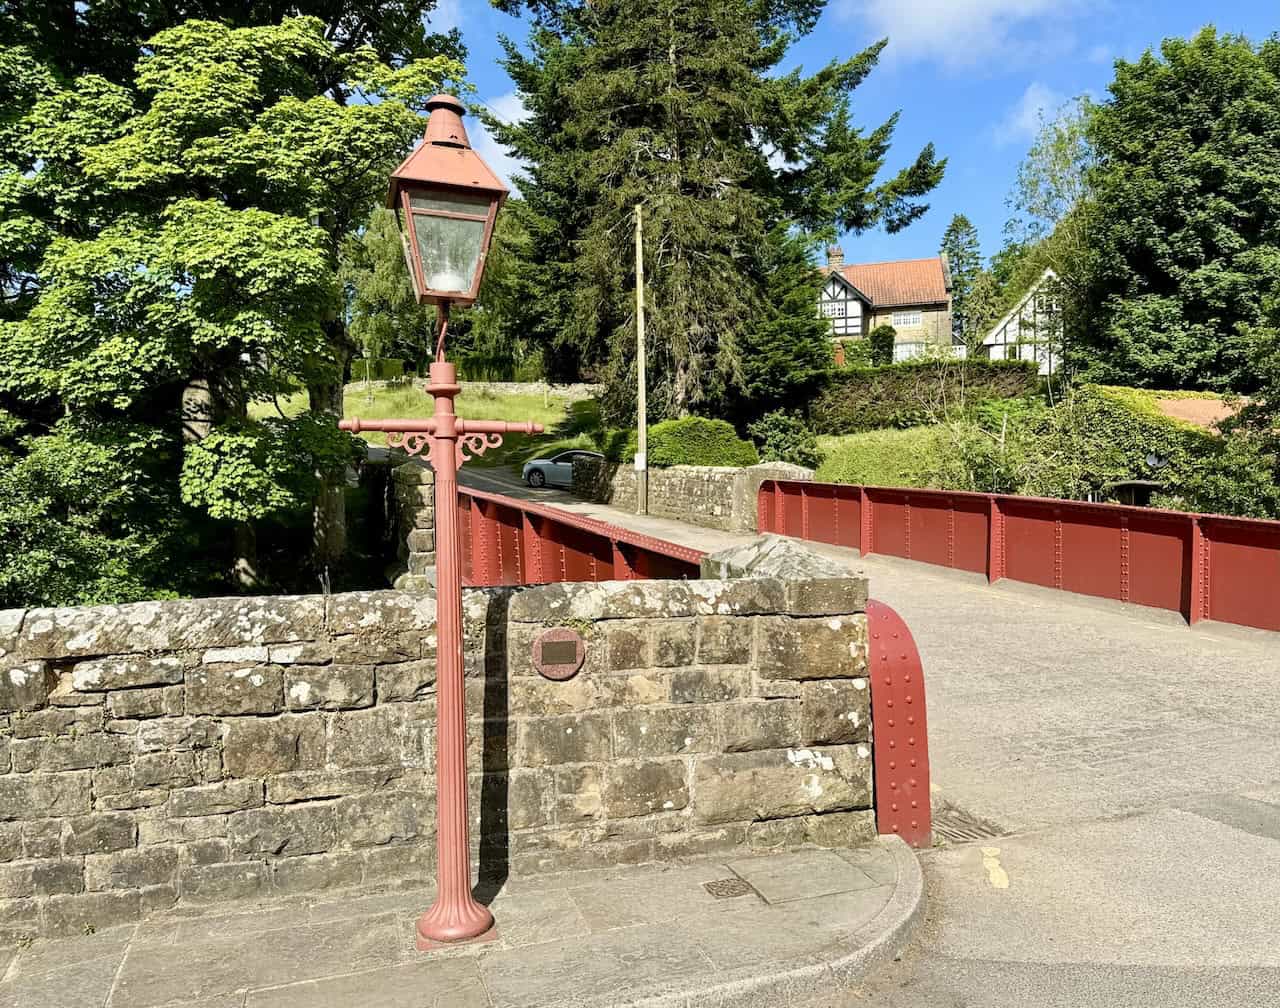 The bridge crossing Eller Beck near the railway station with a vintage-style lamp post. The plaque commemorates Frances Johnson, who enjoyed visiting Goathland with her husband, John.
